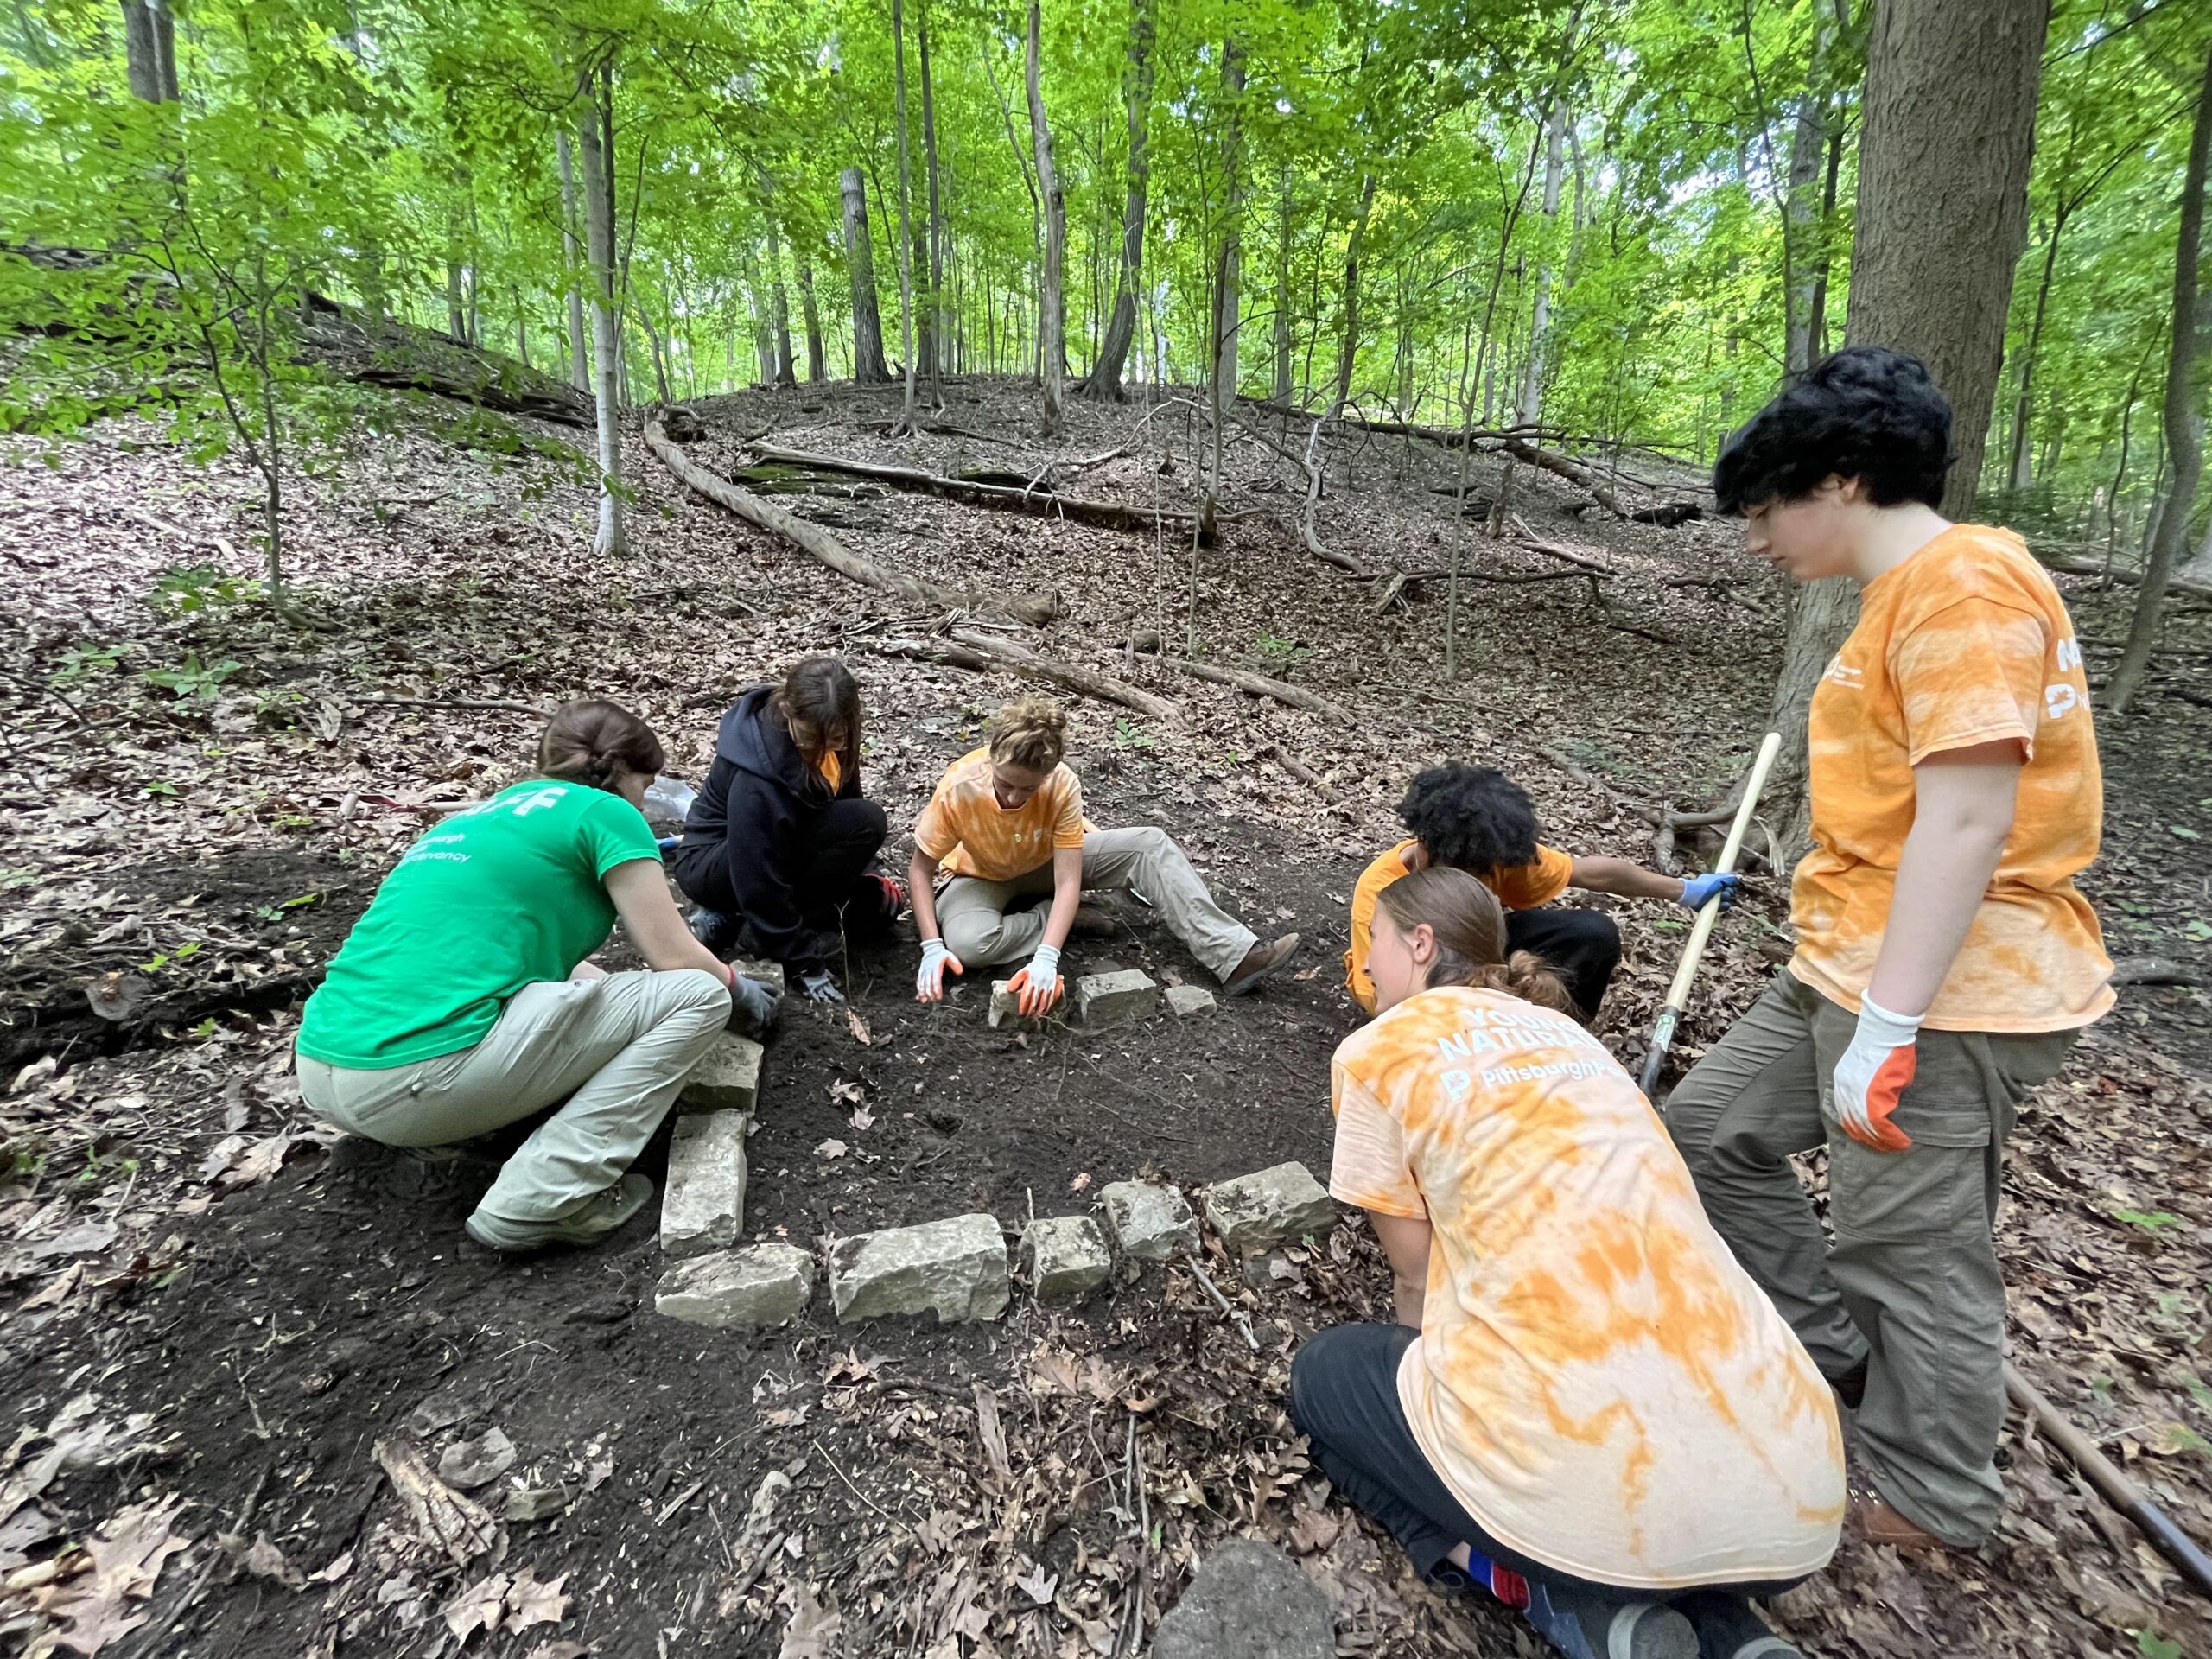 Deadline approaches for city parks conservancy’s award-winning Young Naturalists program